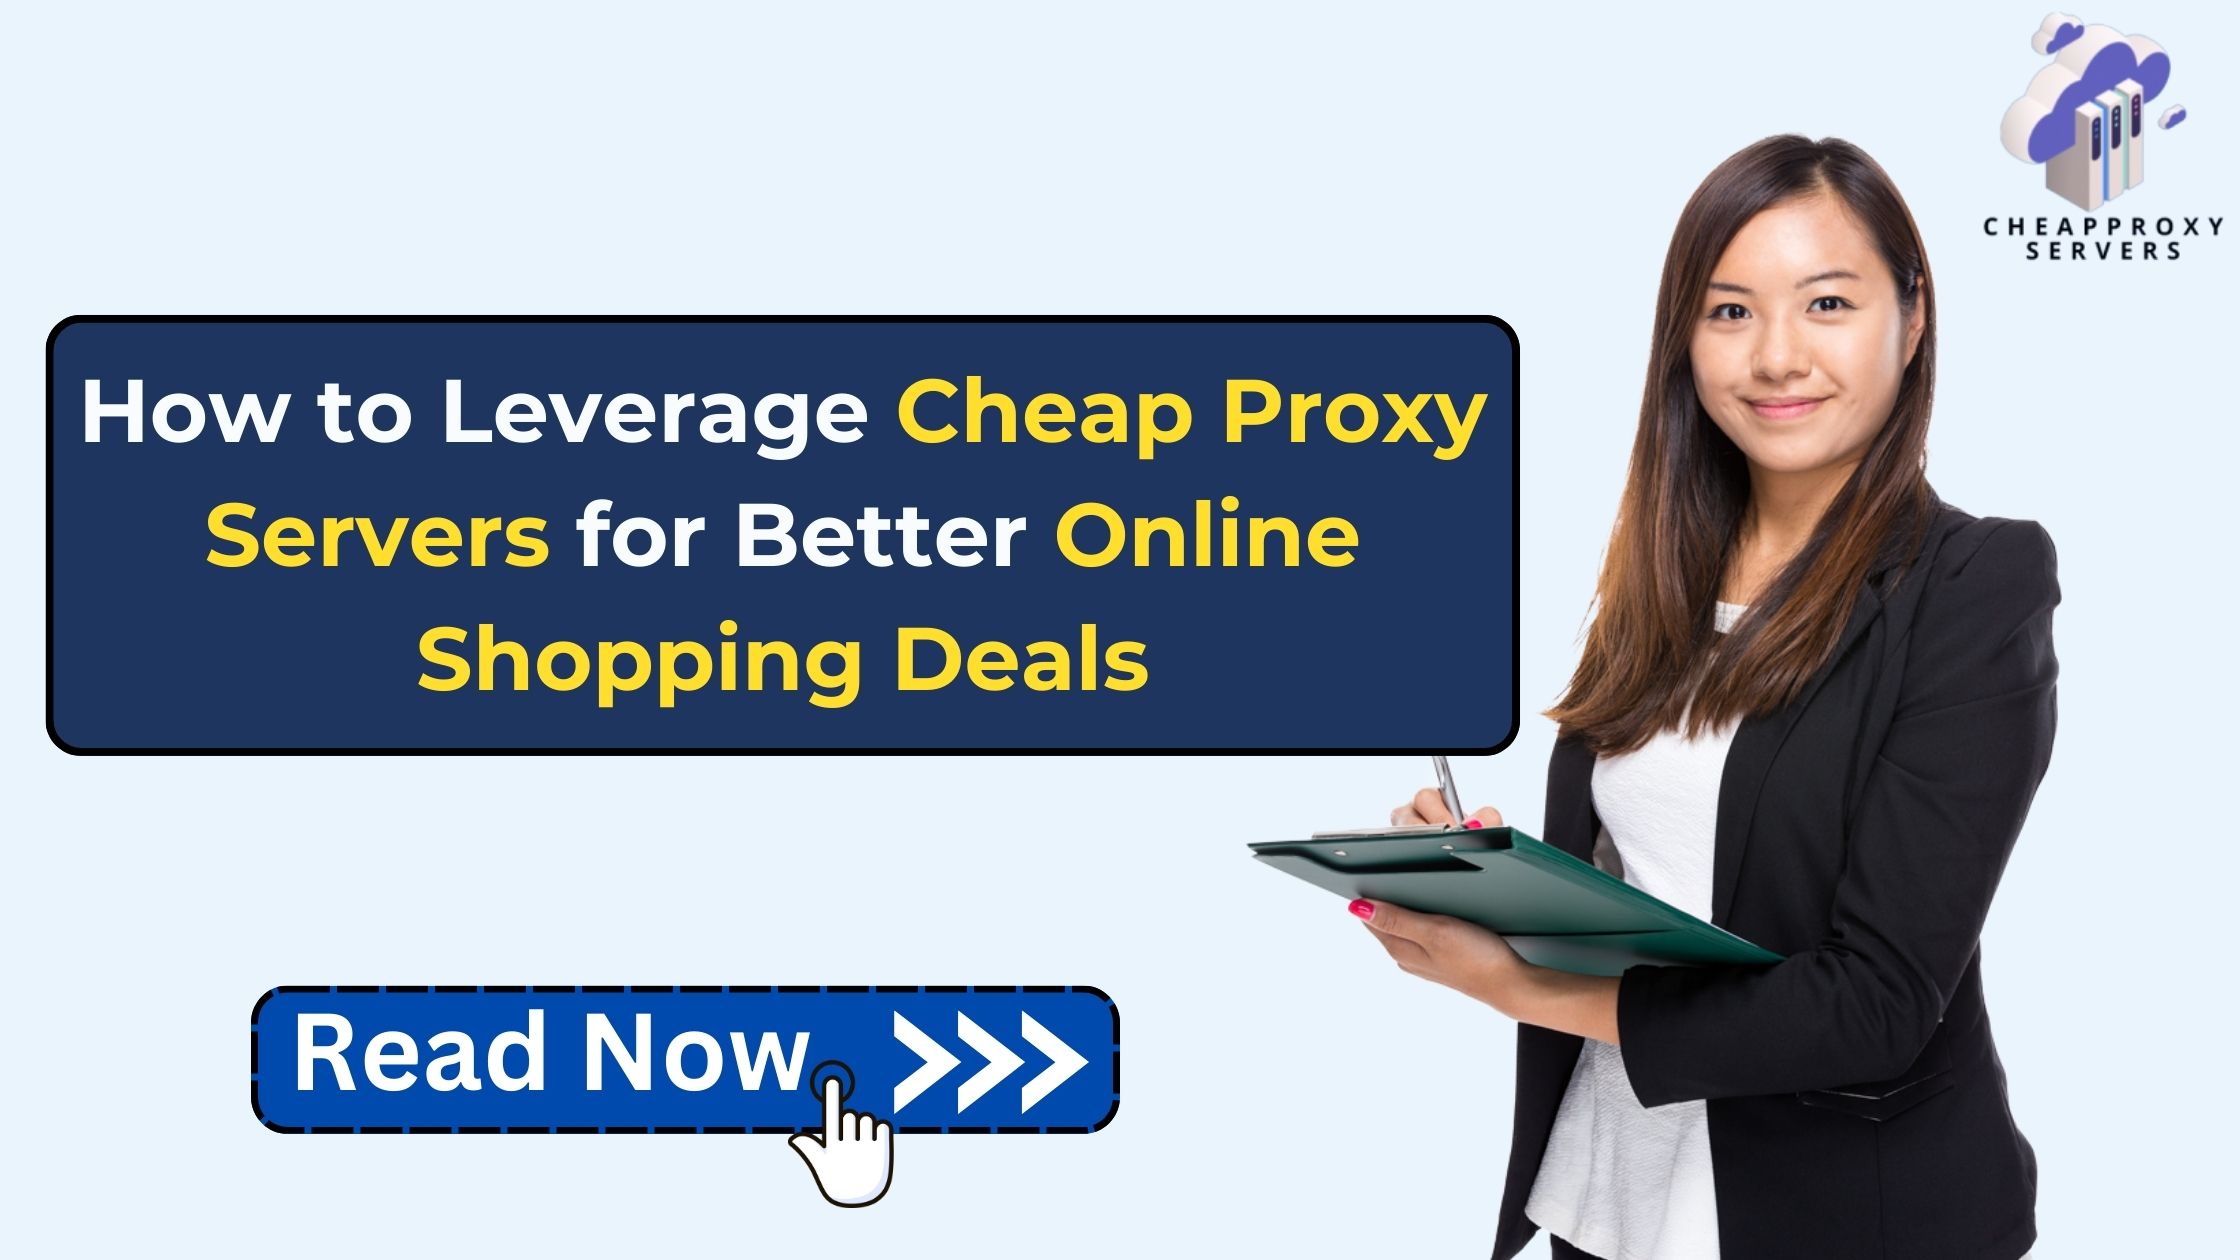 How to Leverage Cheap Proxy Servers for Better Online Shopping Deals